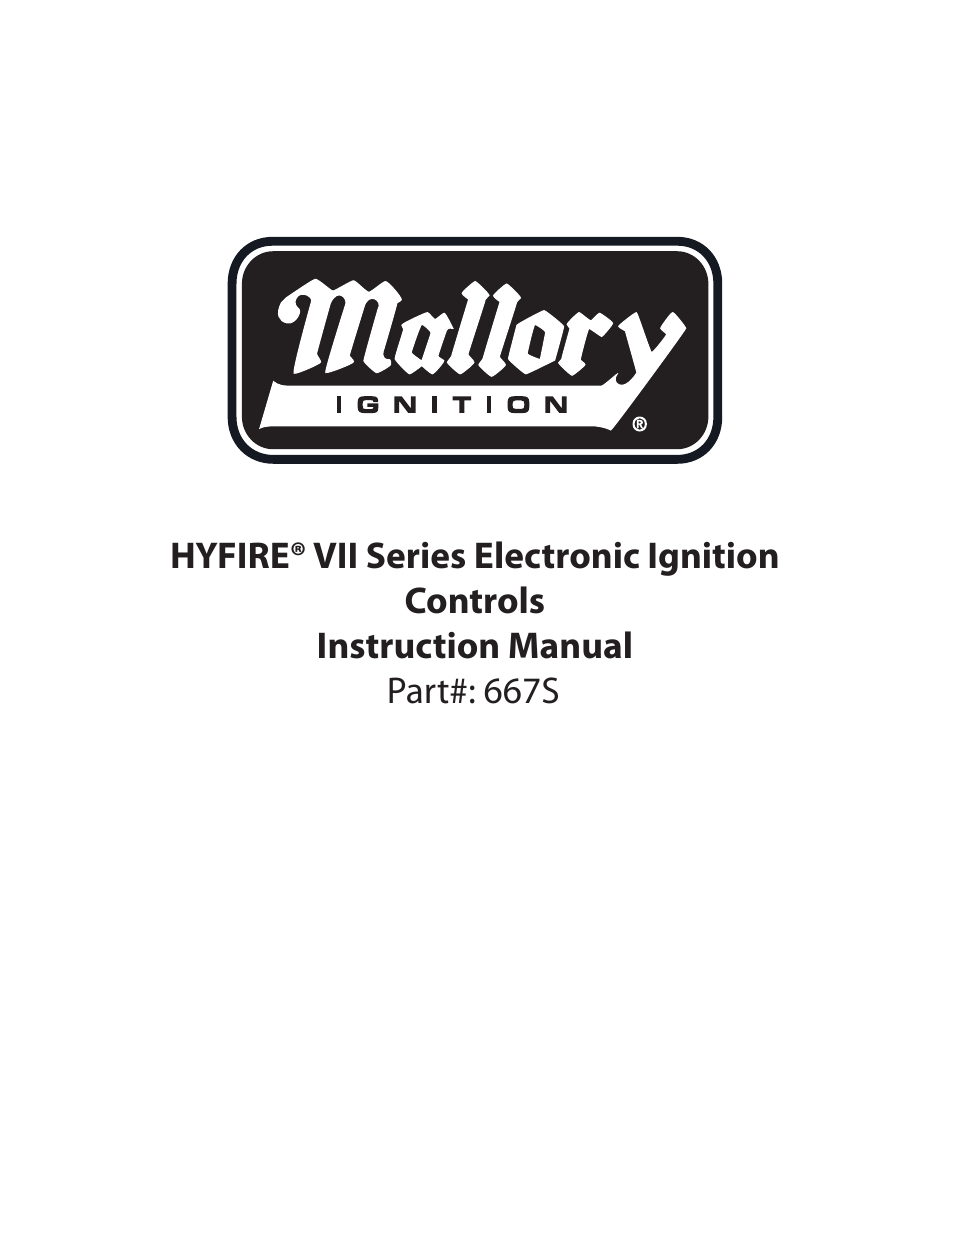 Mallory HYFIRE VII Series Electronic Ignition Controls 667S